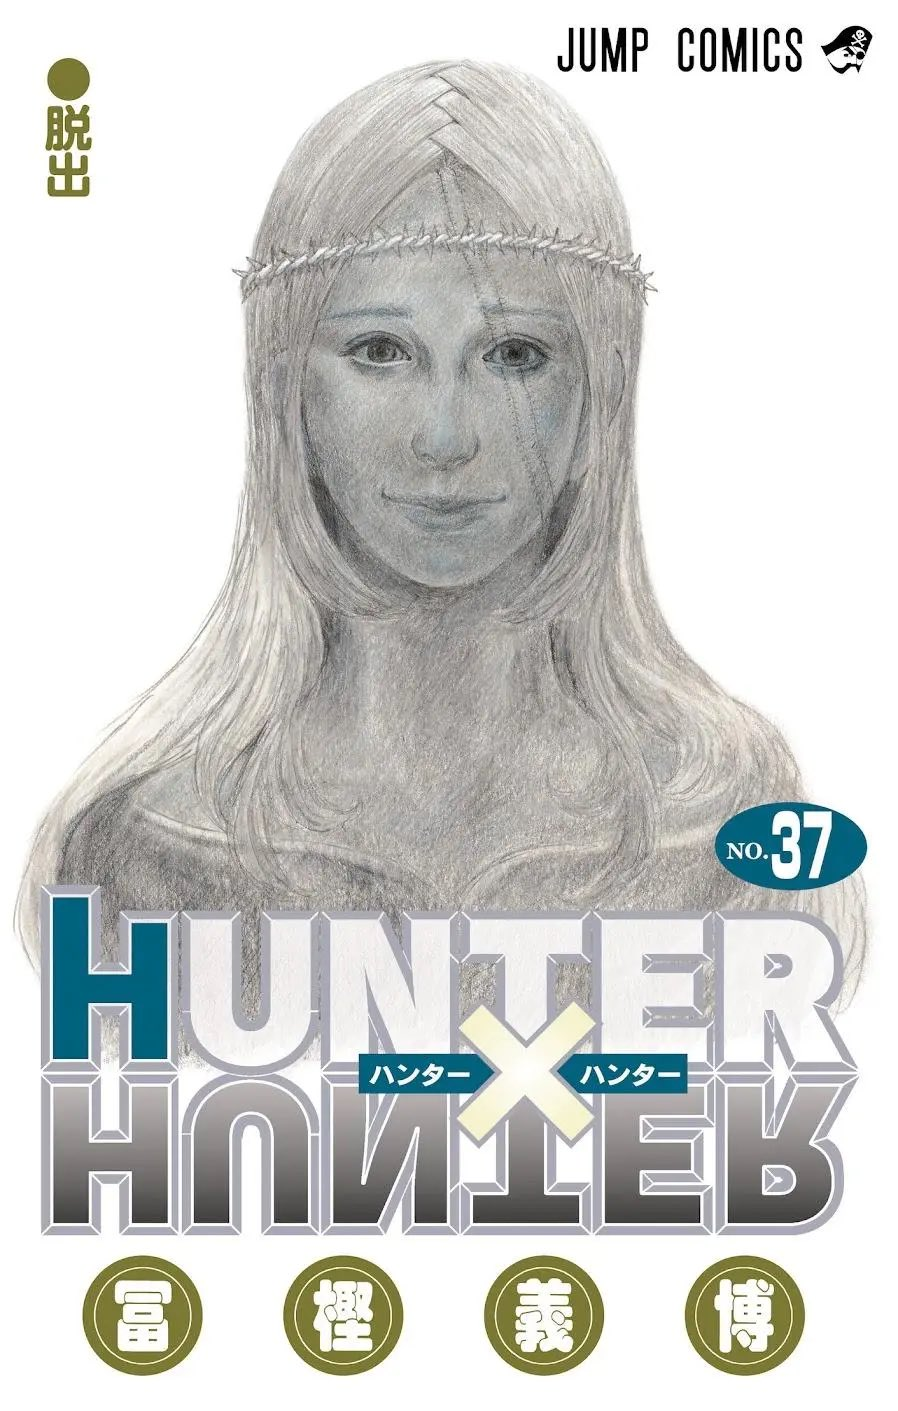 Will Hunter x Hunter manga ever continue? Fans desperate as series  approaches 3 year long hiatus